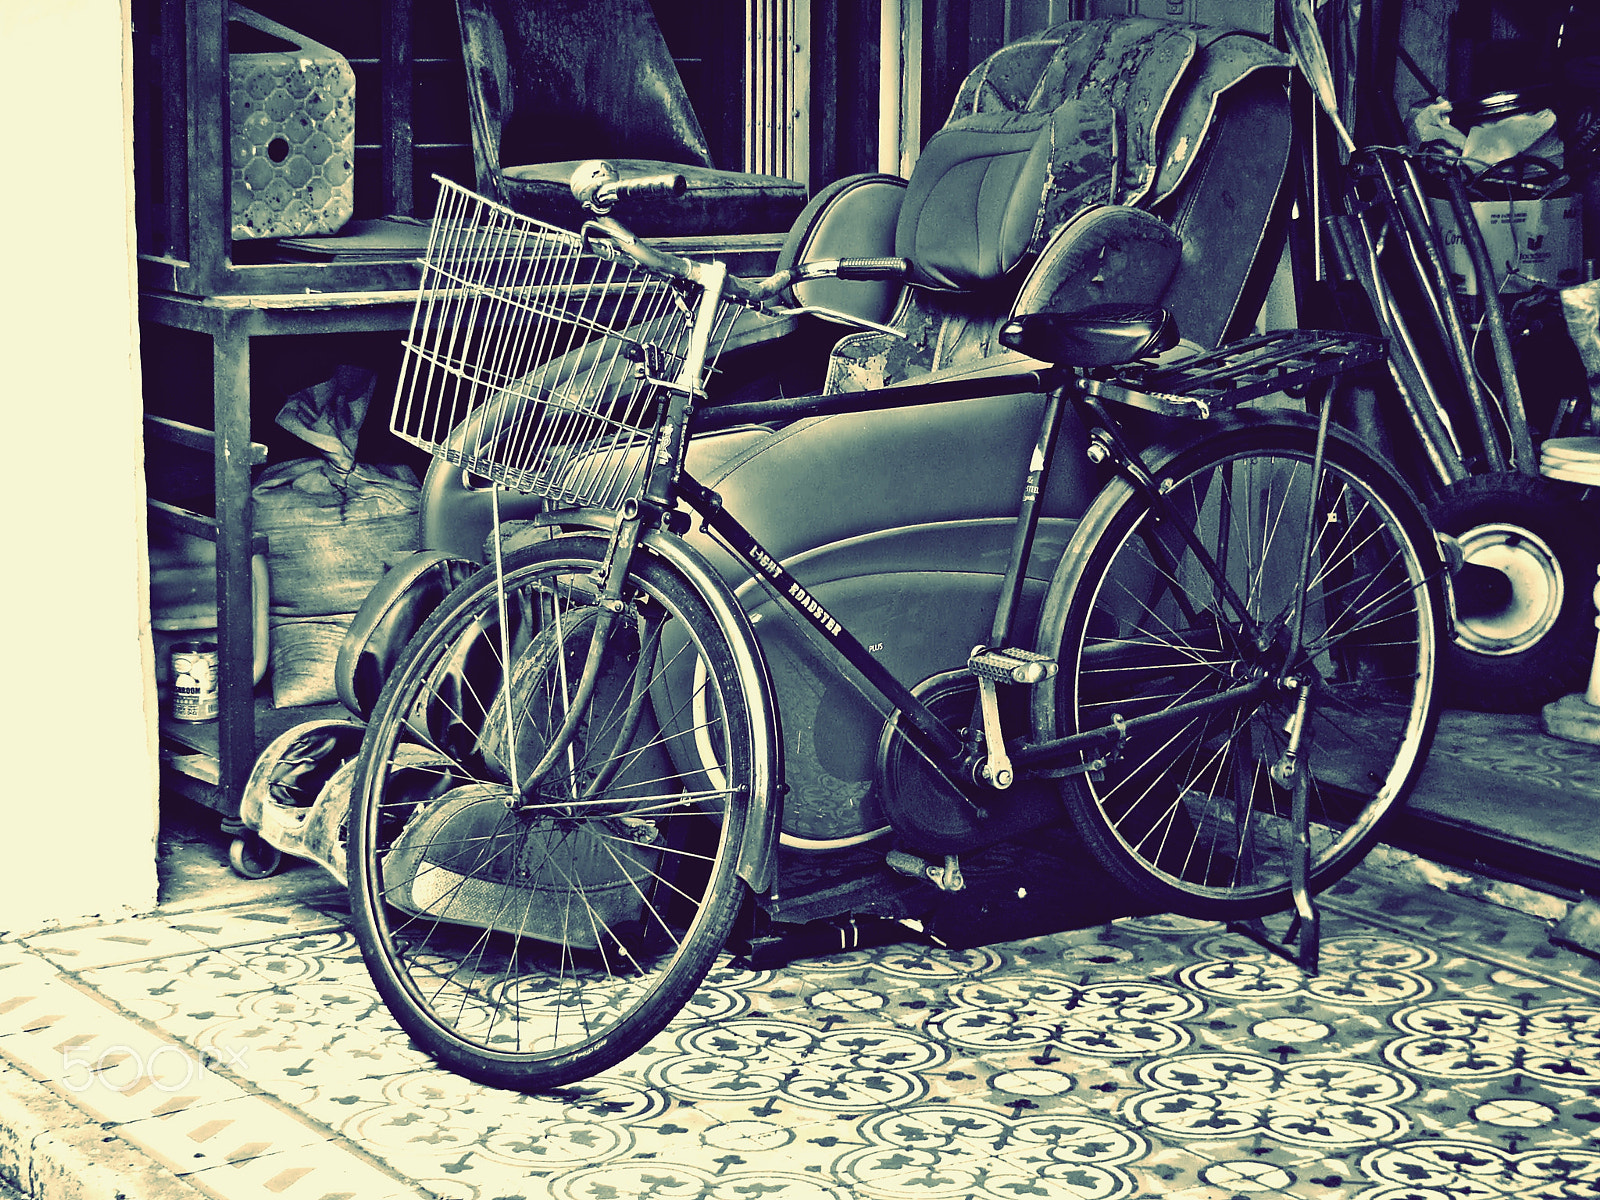 Nikon Coolpix S1200pj sample photo. Old bicycle in old shop photography